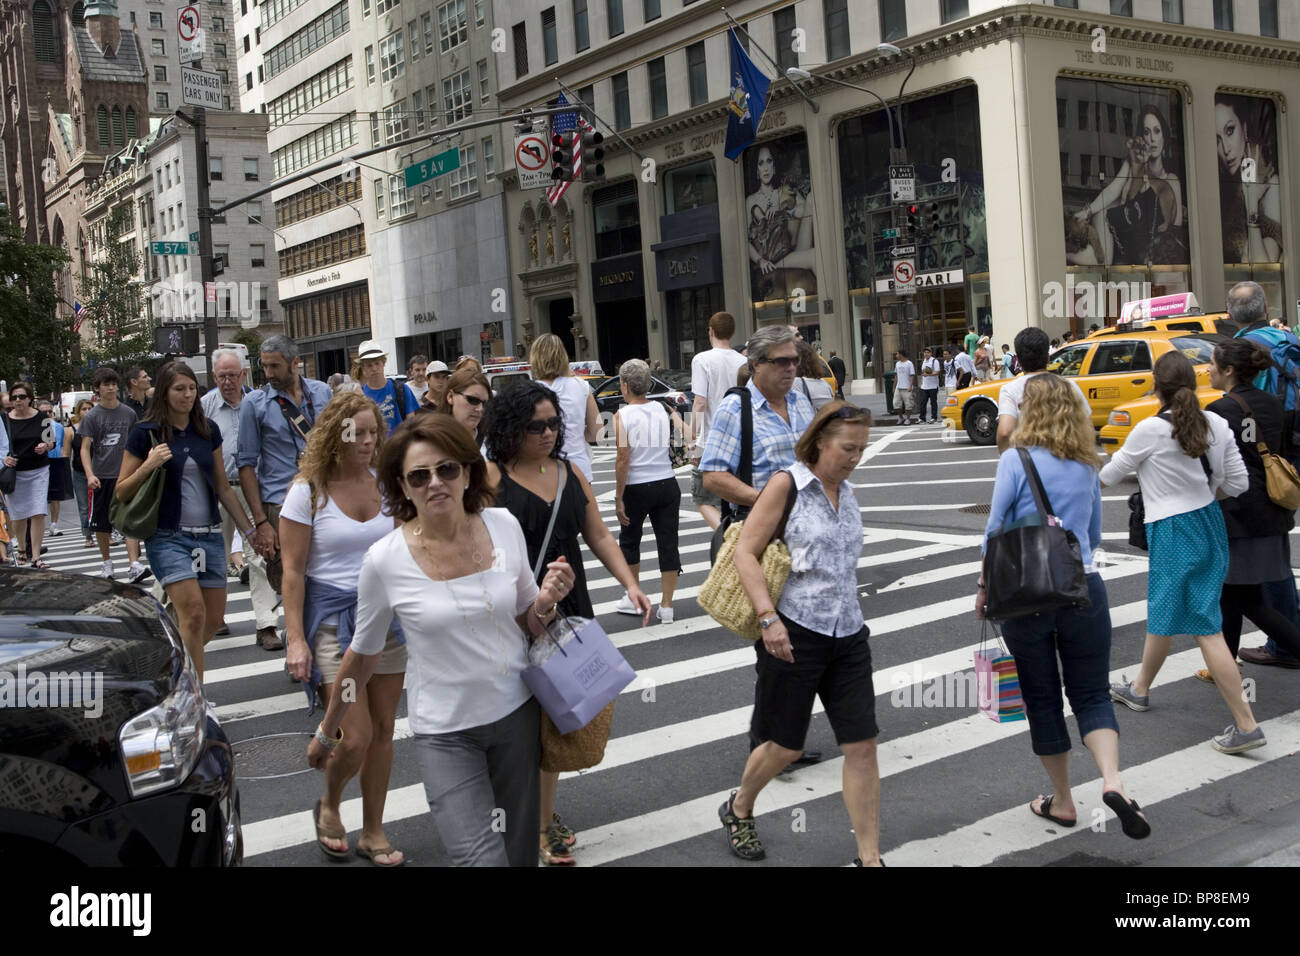 There are always a mixture of shoppers, tourists and New Yorkers along 5th Avenue at 57th Street in New York City. Stock Photo